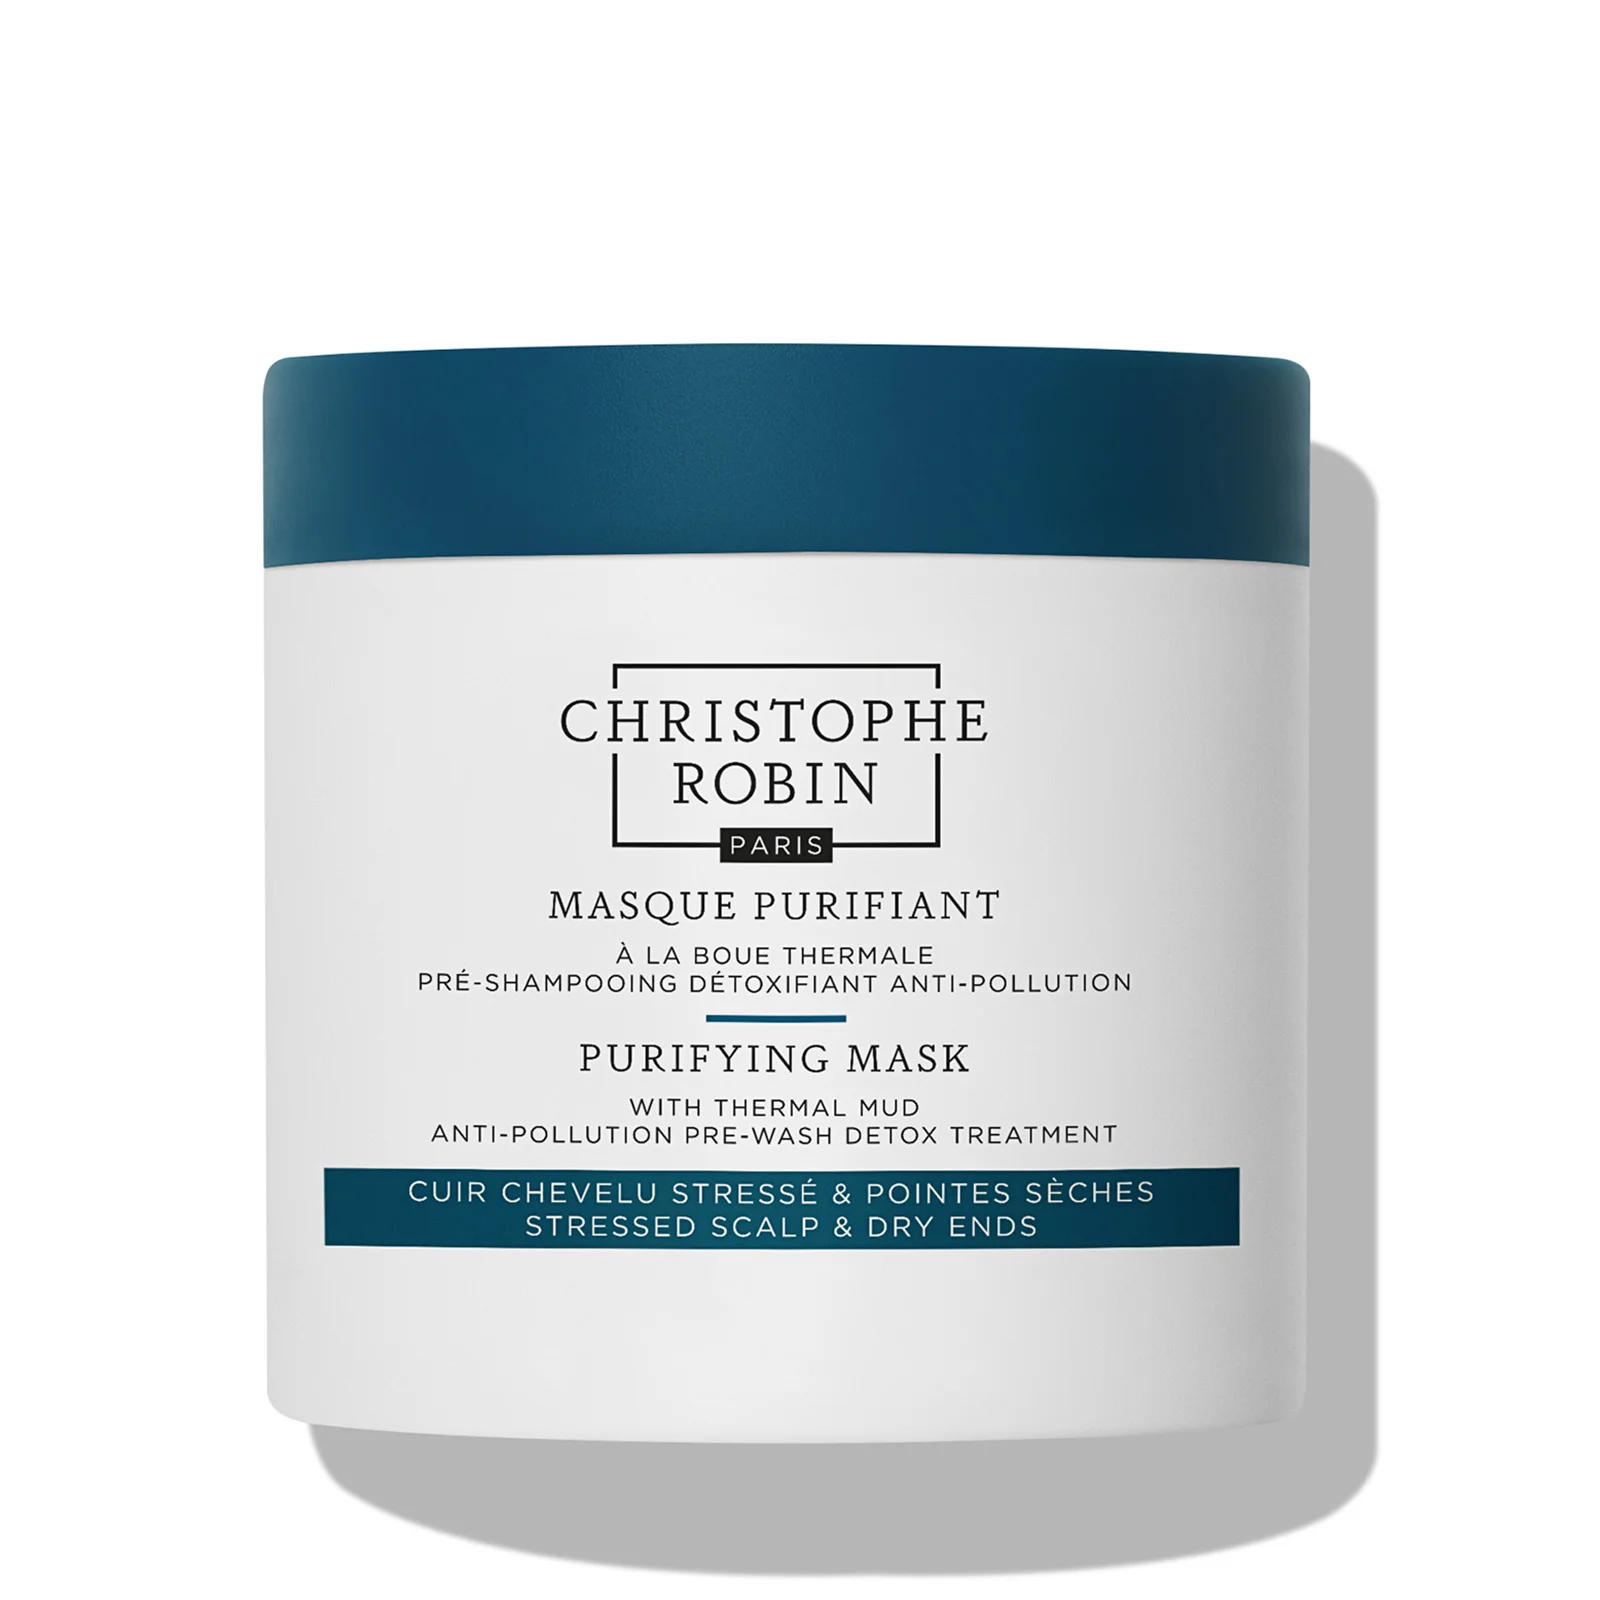 Christophe Robin Purifying Mask with Thermal Mud 250ml Image 1